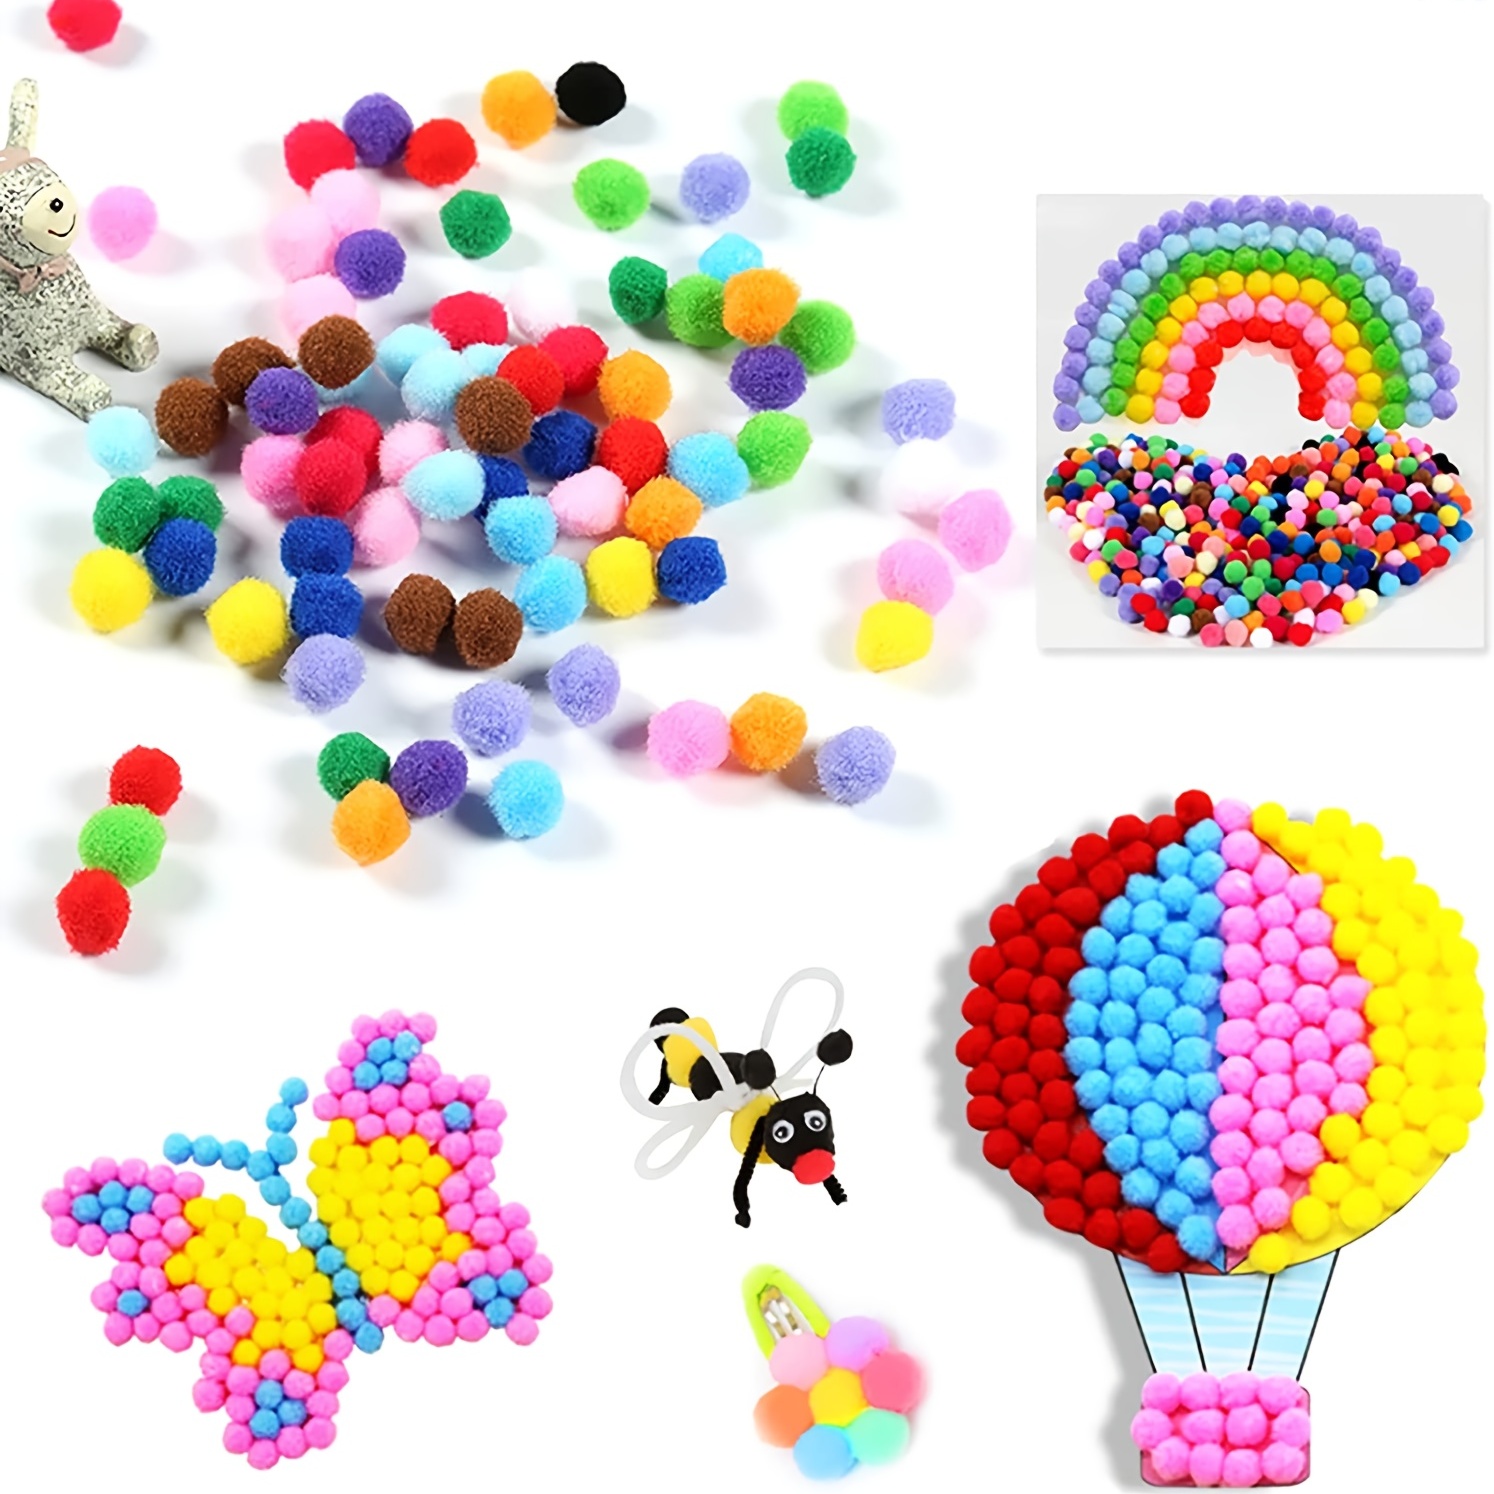 Blue Pom Poms Balls for Hobby Supplies and DIY Creative Crafts Party D